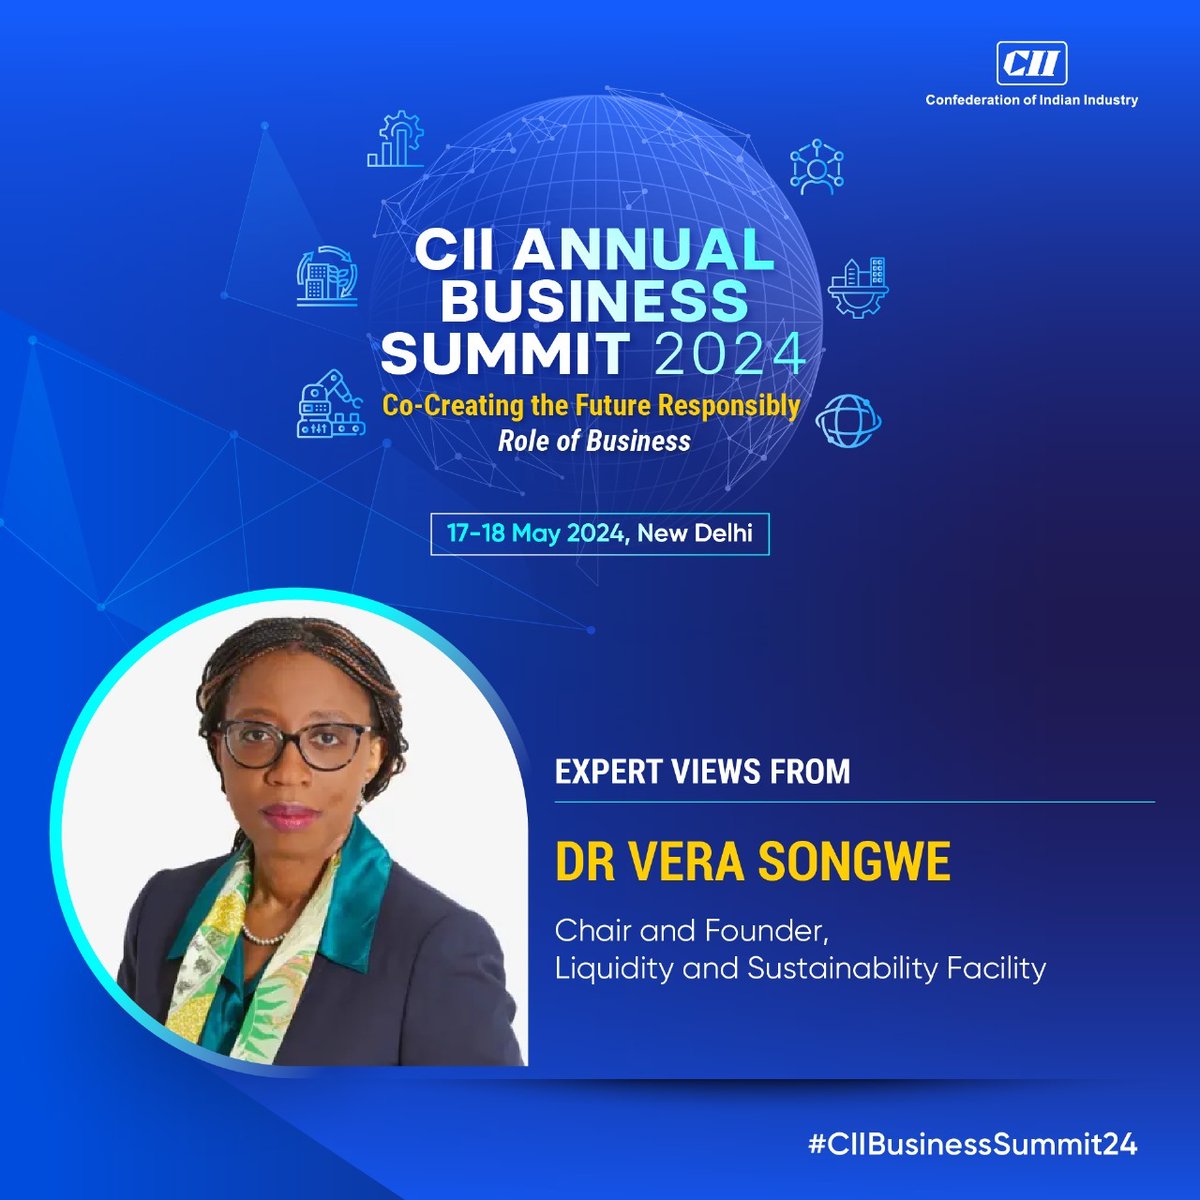 Dr @SongweVera, Chair and Founder, Liquidity and Sustainability Facility shares deep insights at the CII Annual Business Summit 2024! Join for thought provoking discussions on India's future and its progress on competitiveness, inclusiveness, innovation, globalisation and